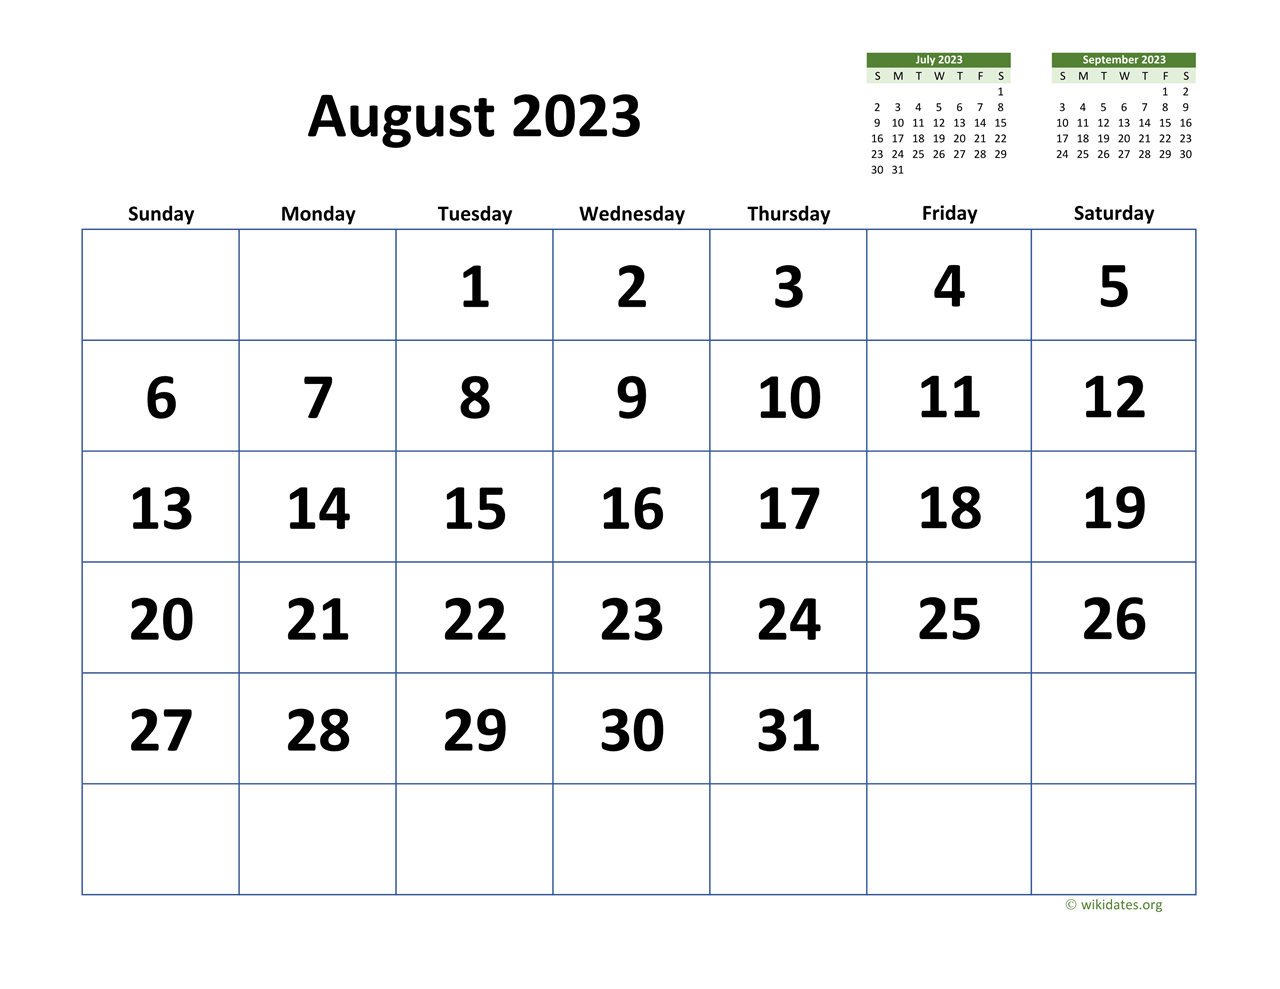 august-2023-calendar-with-extra-large-dates-wikidates